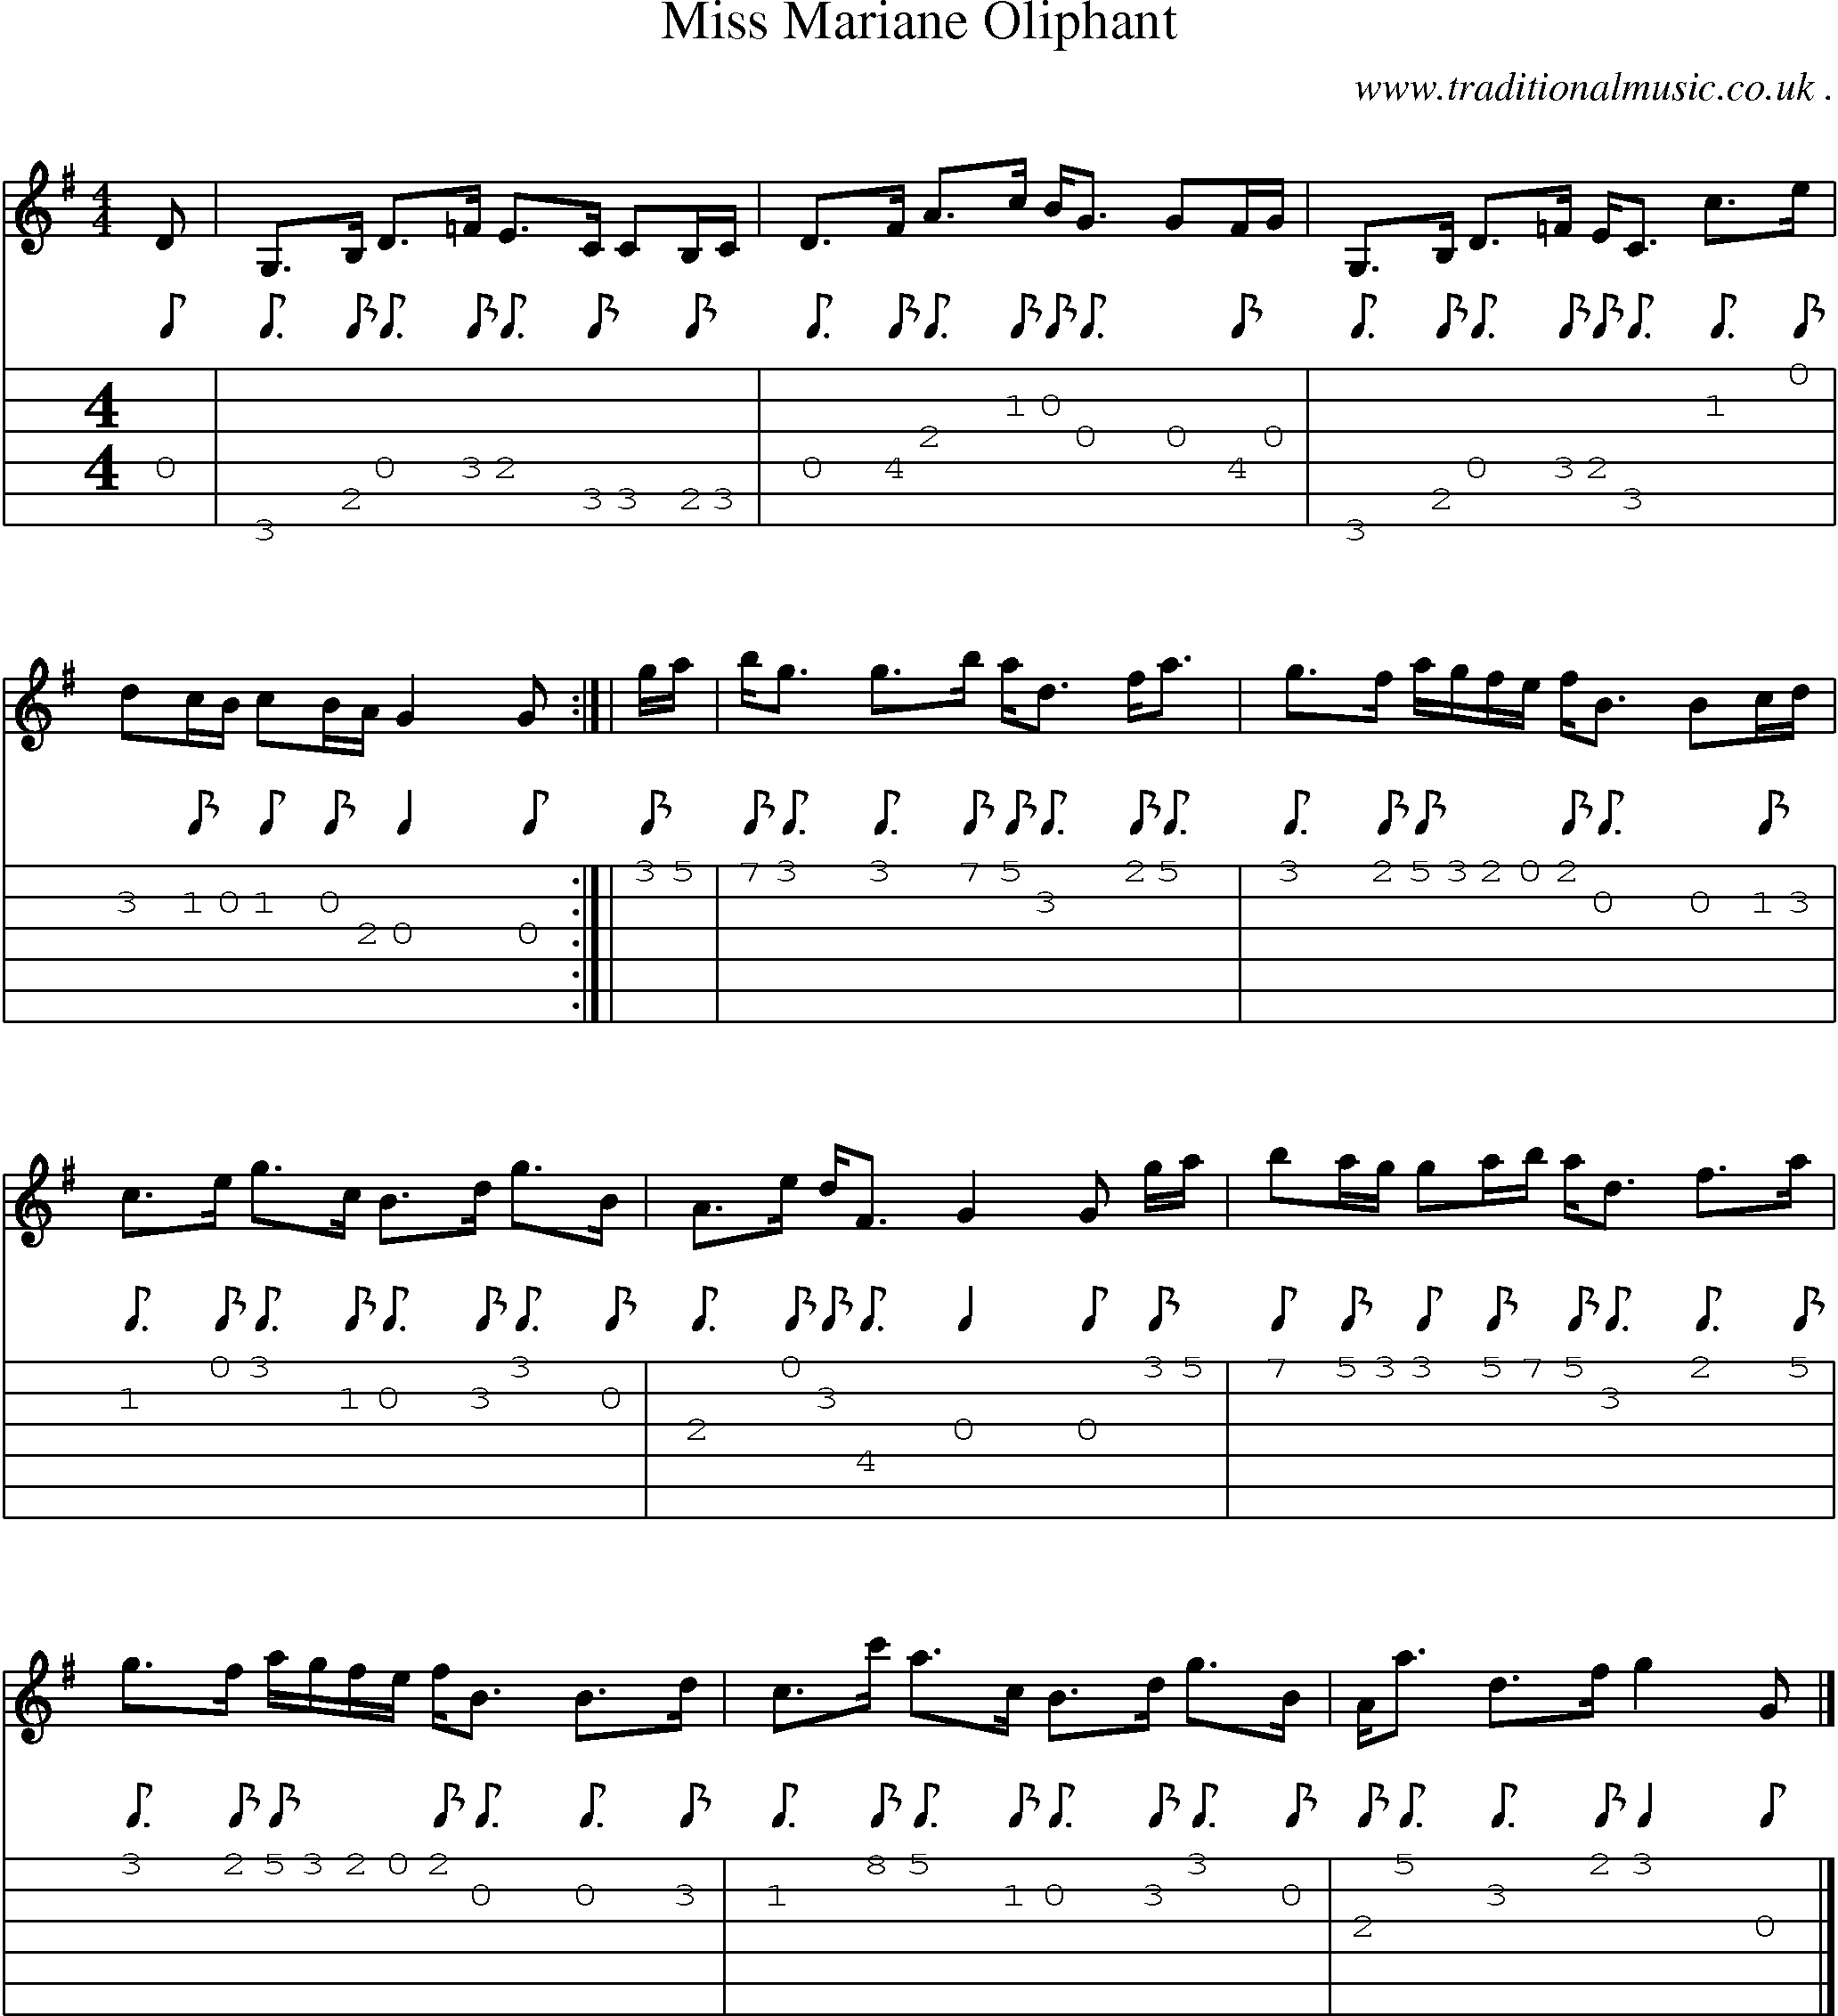 Sheet-music  score, Chords and Guitar Tabs for Miss Mariane Oliphant